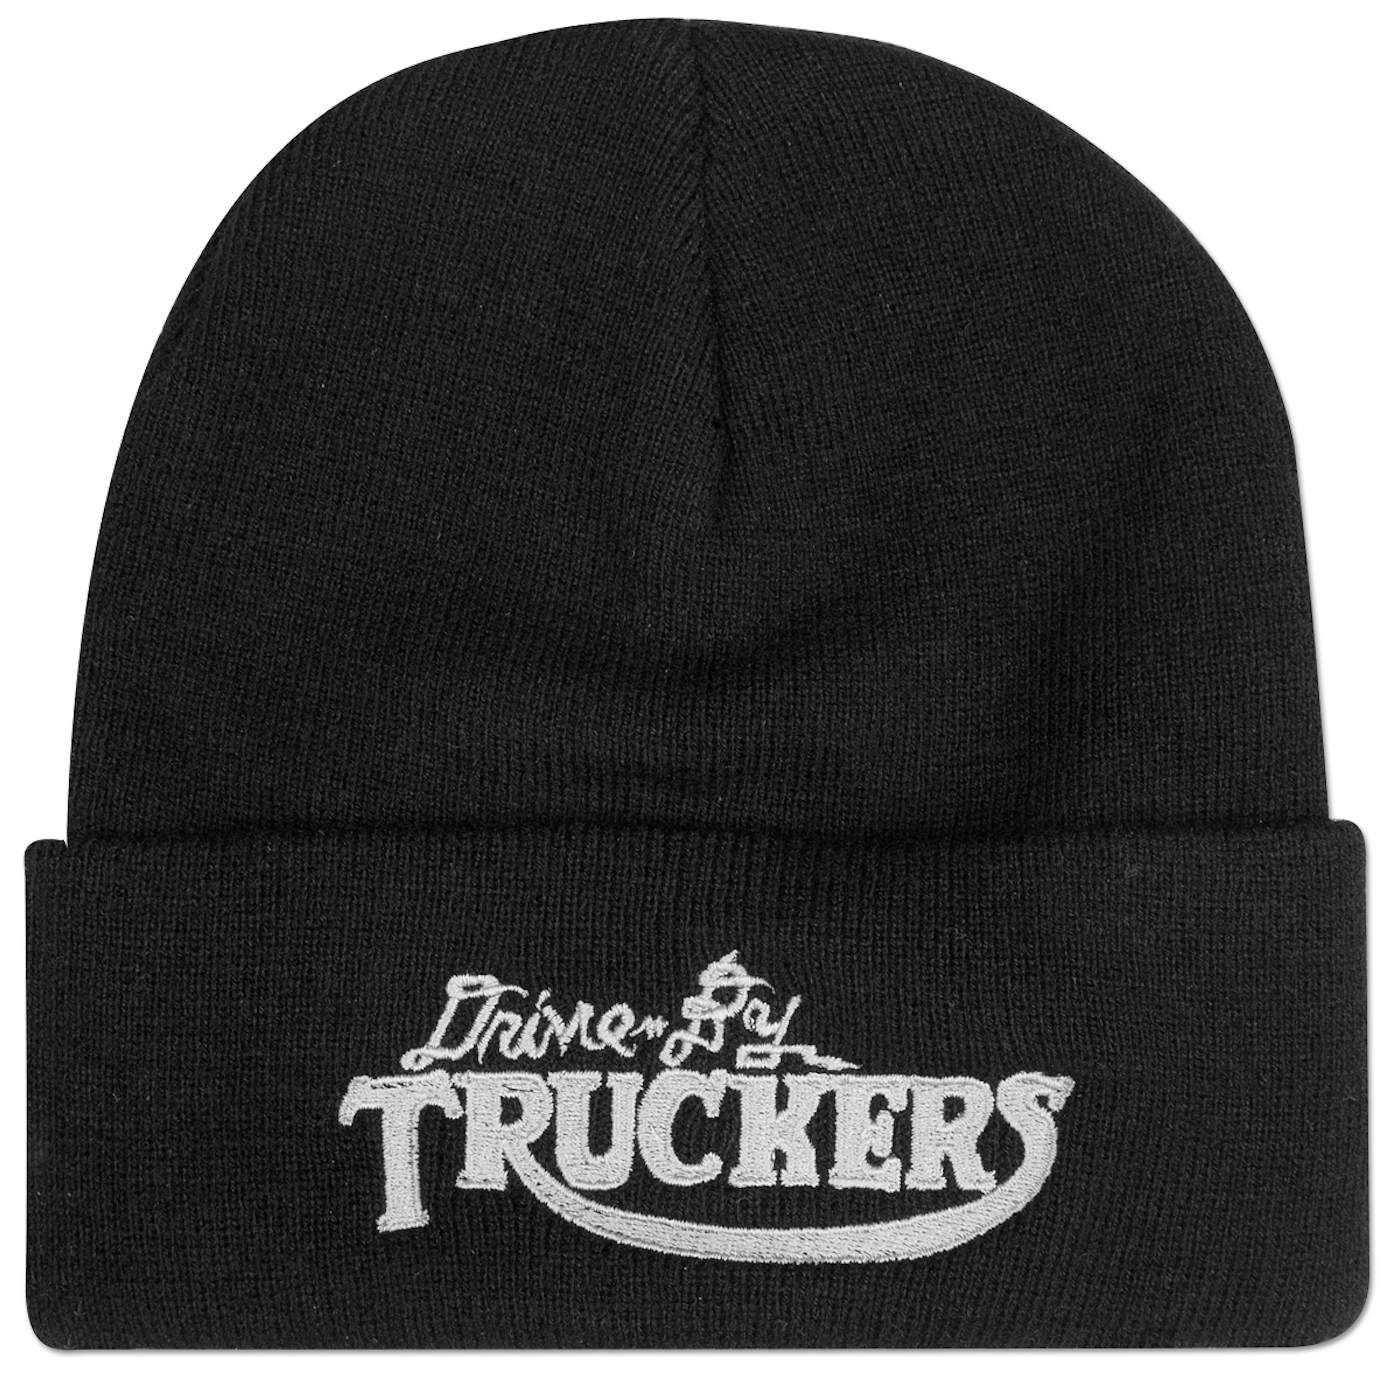 Drive-By Truckers Embroidered Beanie